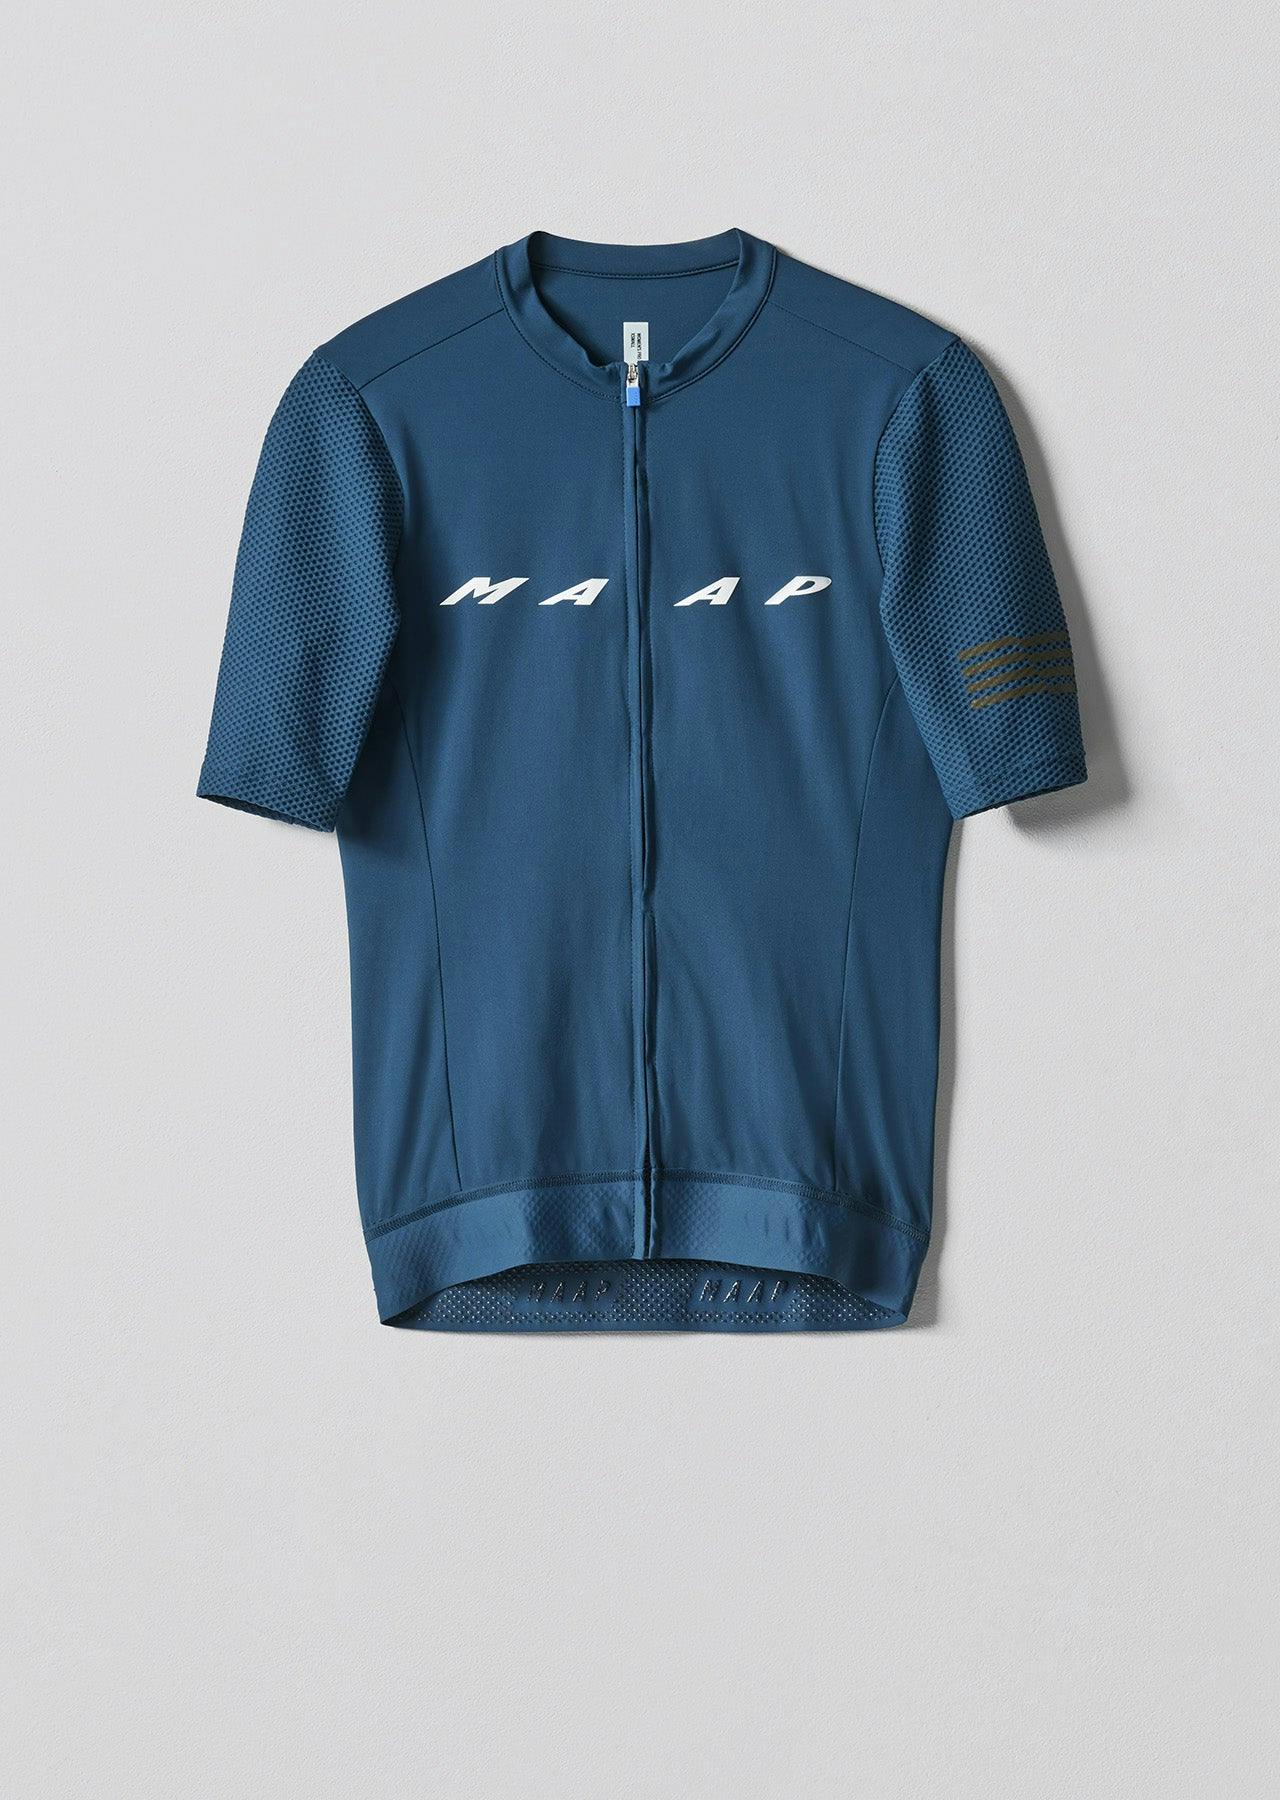 Women’s Cycling Clothing on Sale | Archive | MAAP